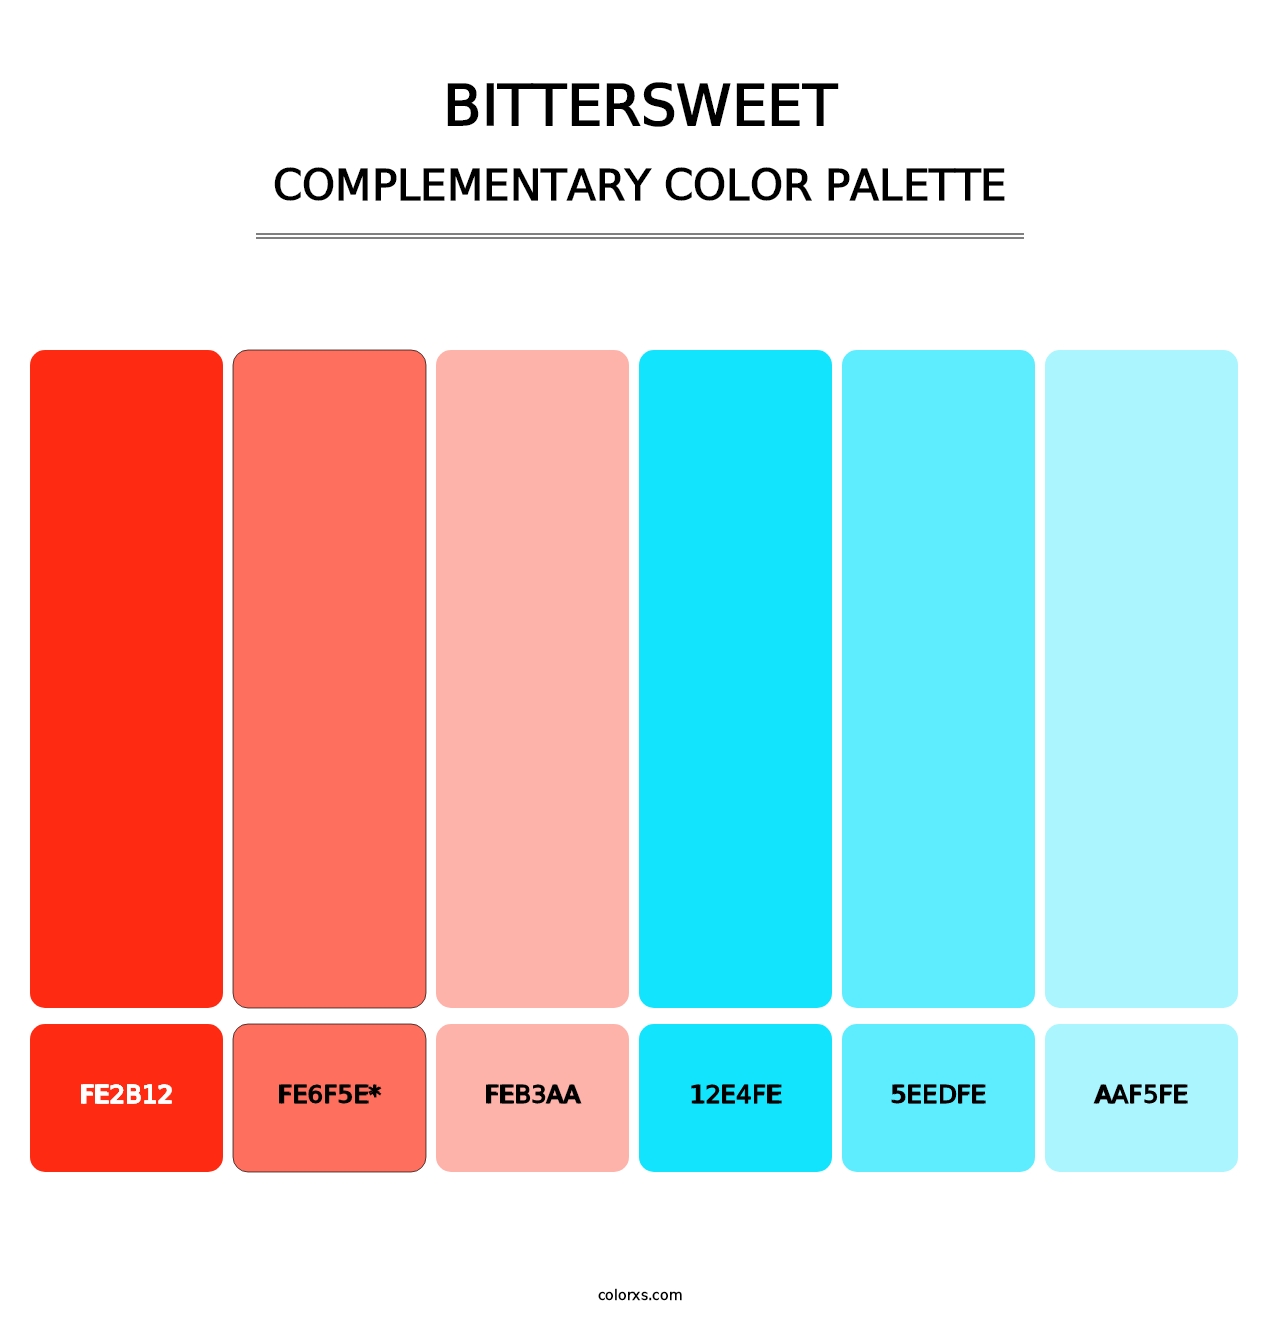 Bittersweet - Complementary Color Palette